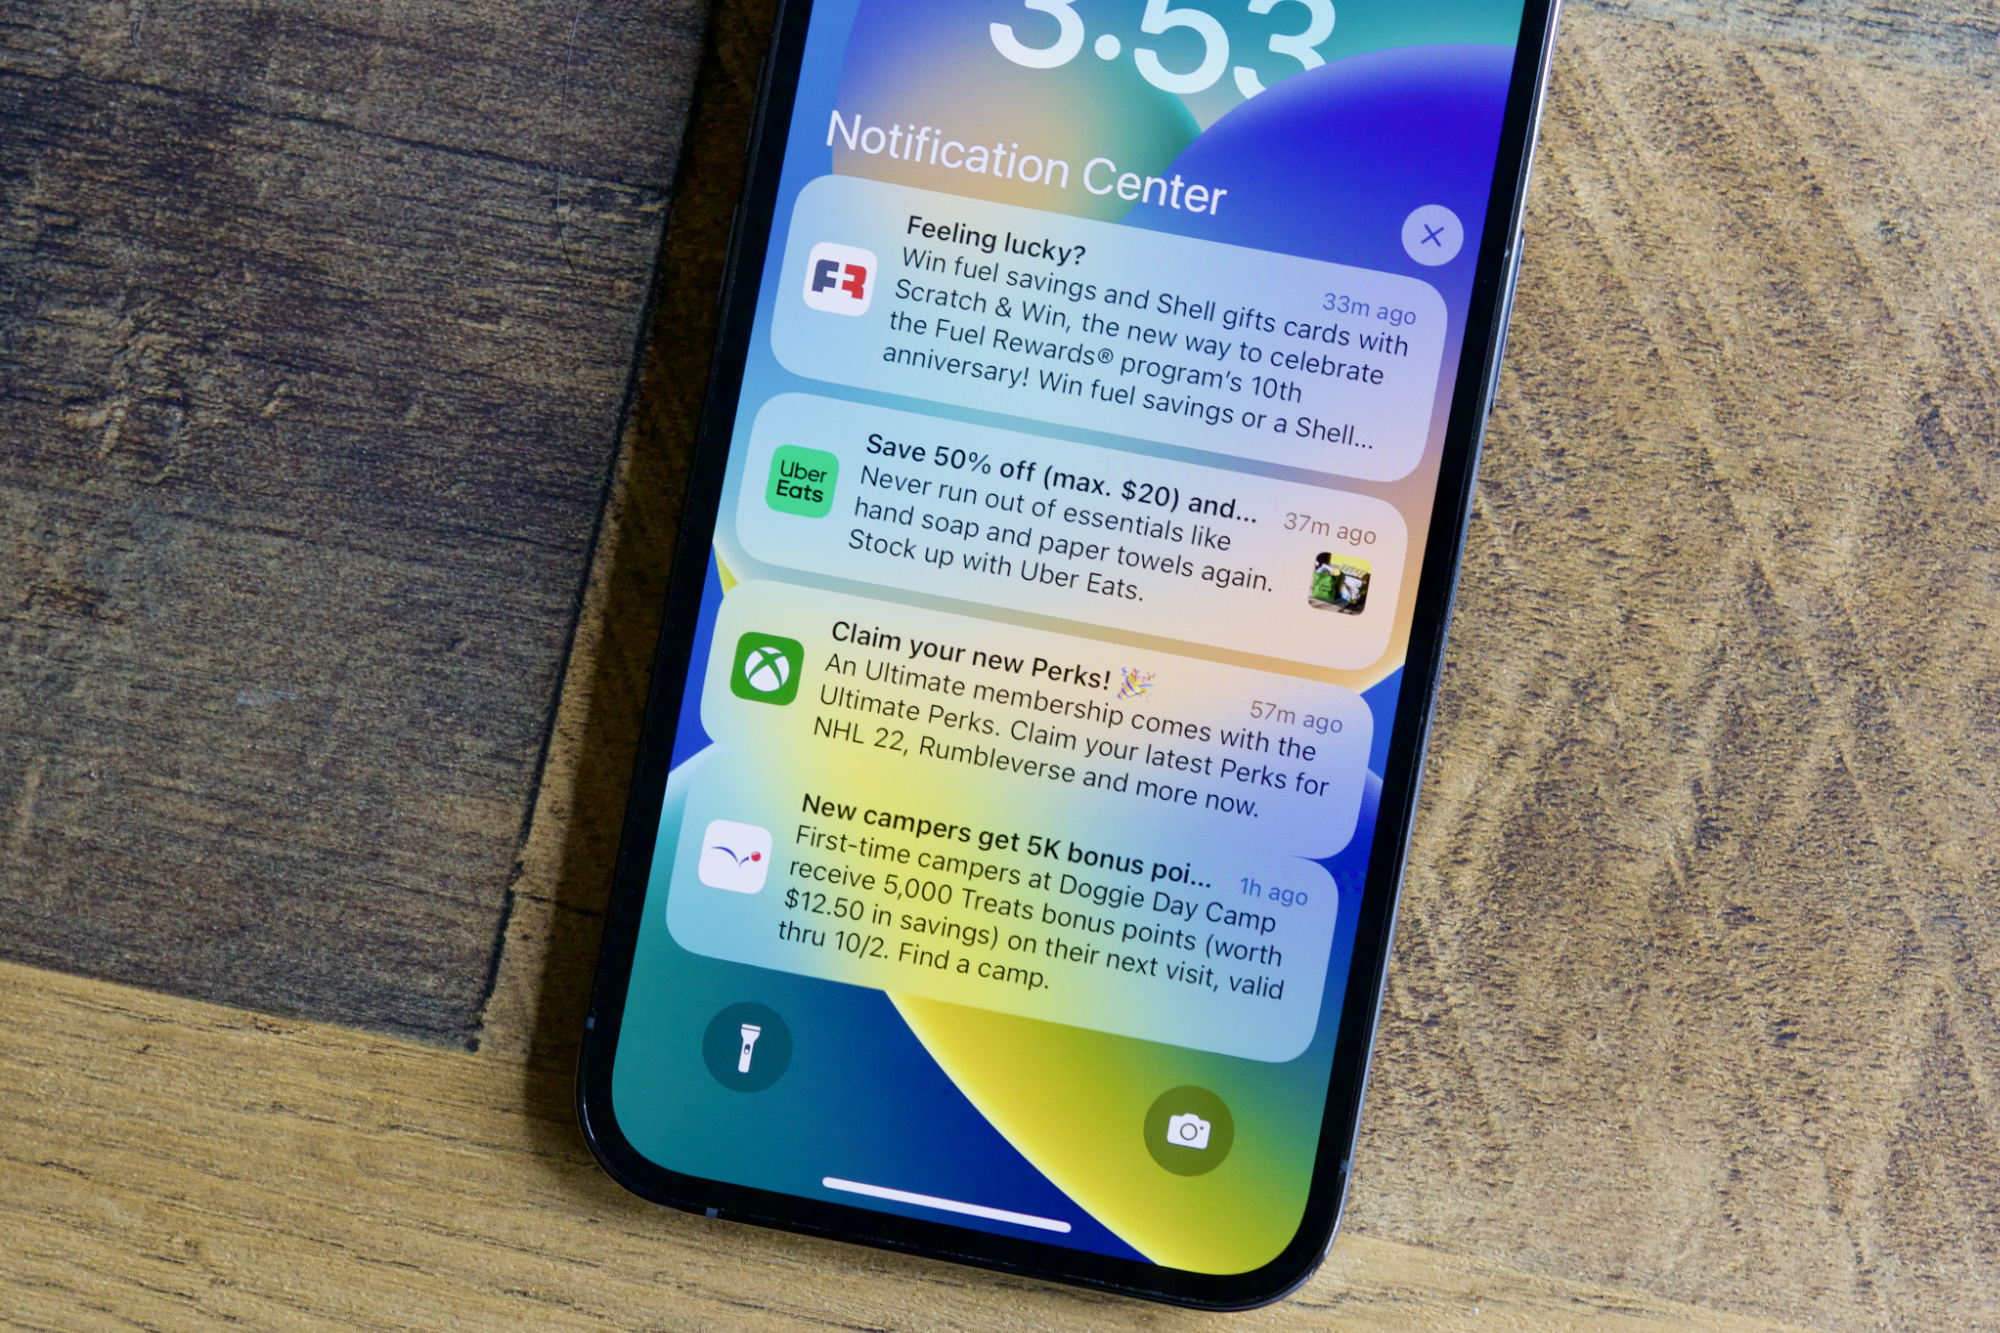 Notifications on an iPhone with iOS 16.